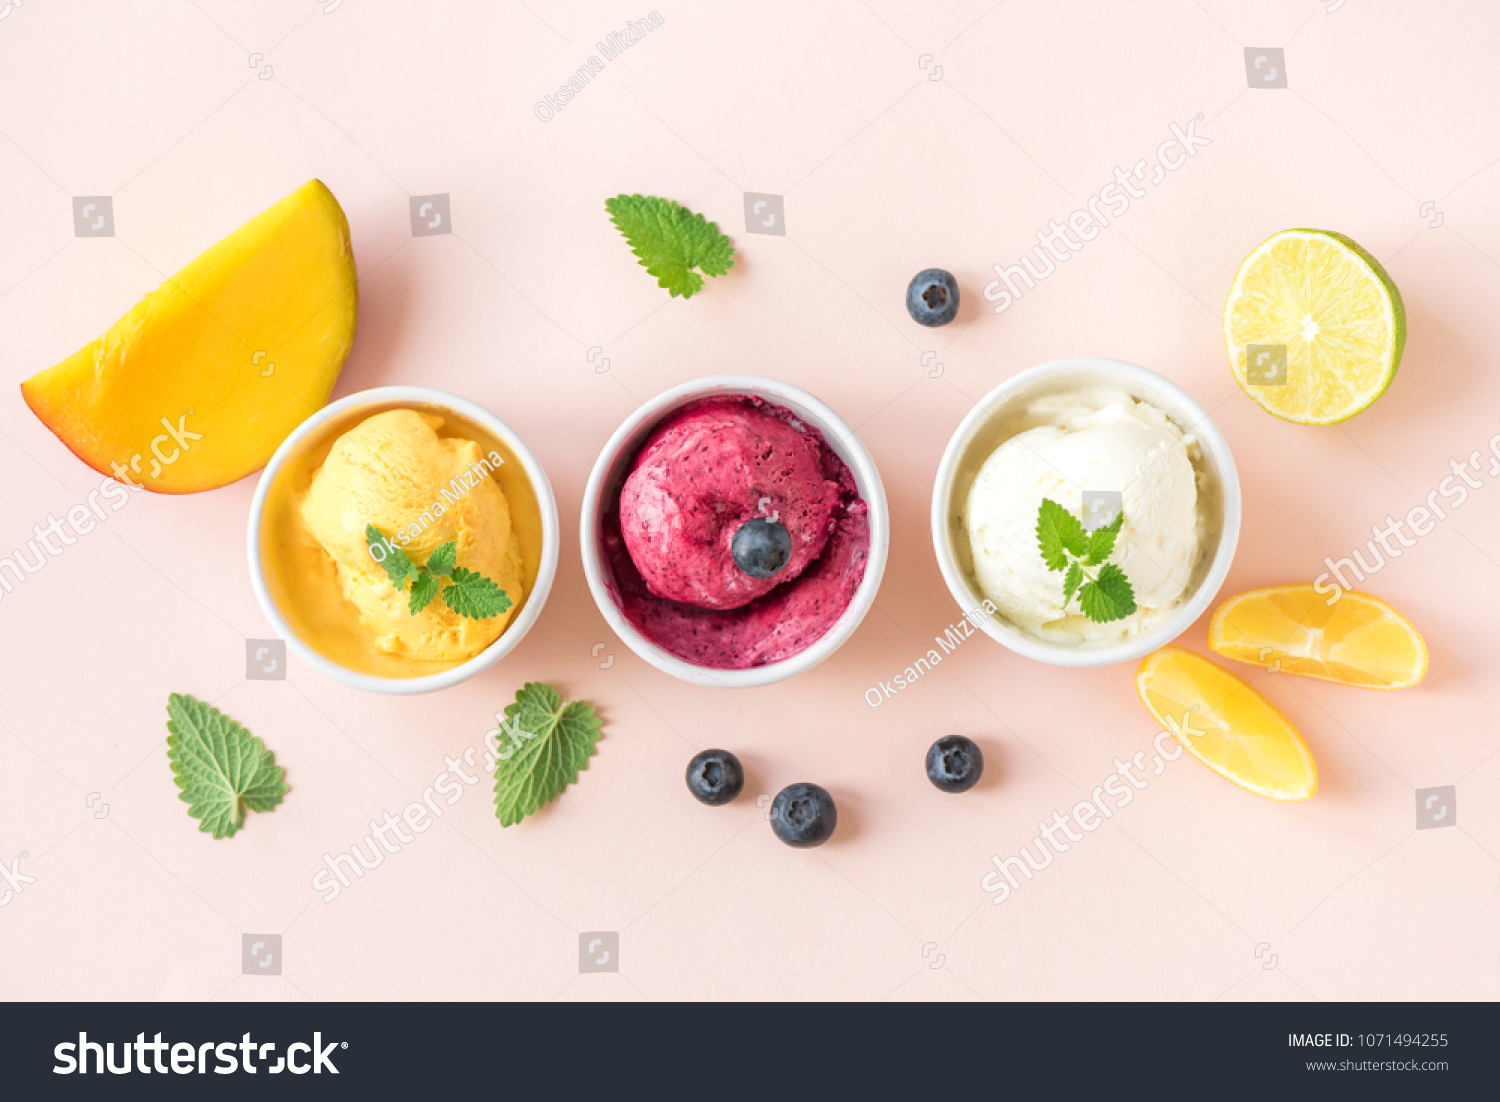 Three various fruit and berries ice creams on pink background, copy space. Frozen yogurt or ice cream with lemon, mango, blueberries - healthy summer dessert. #1071494255